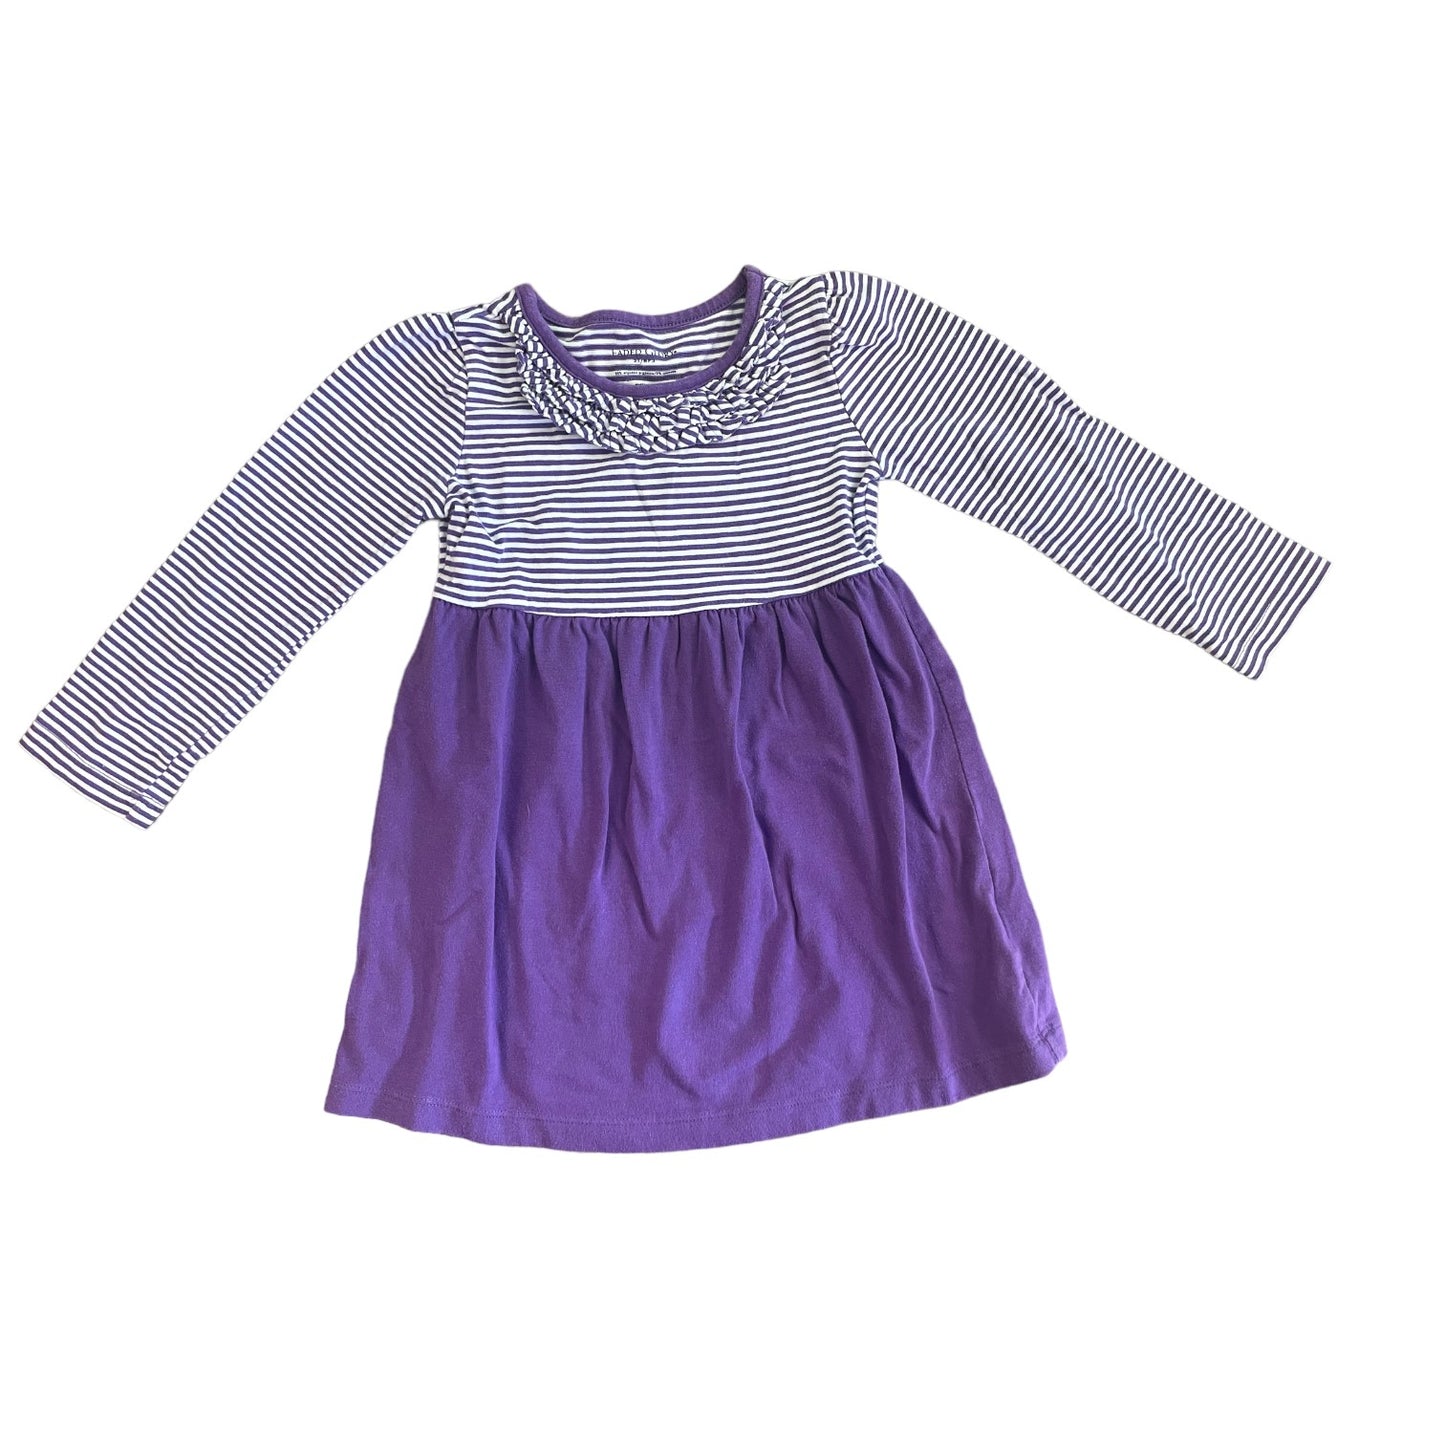 Faded Glory Toddler Dress Size 3T